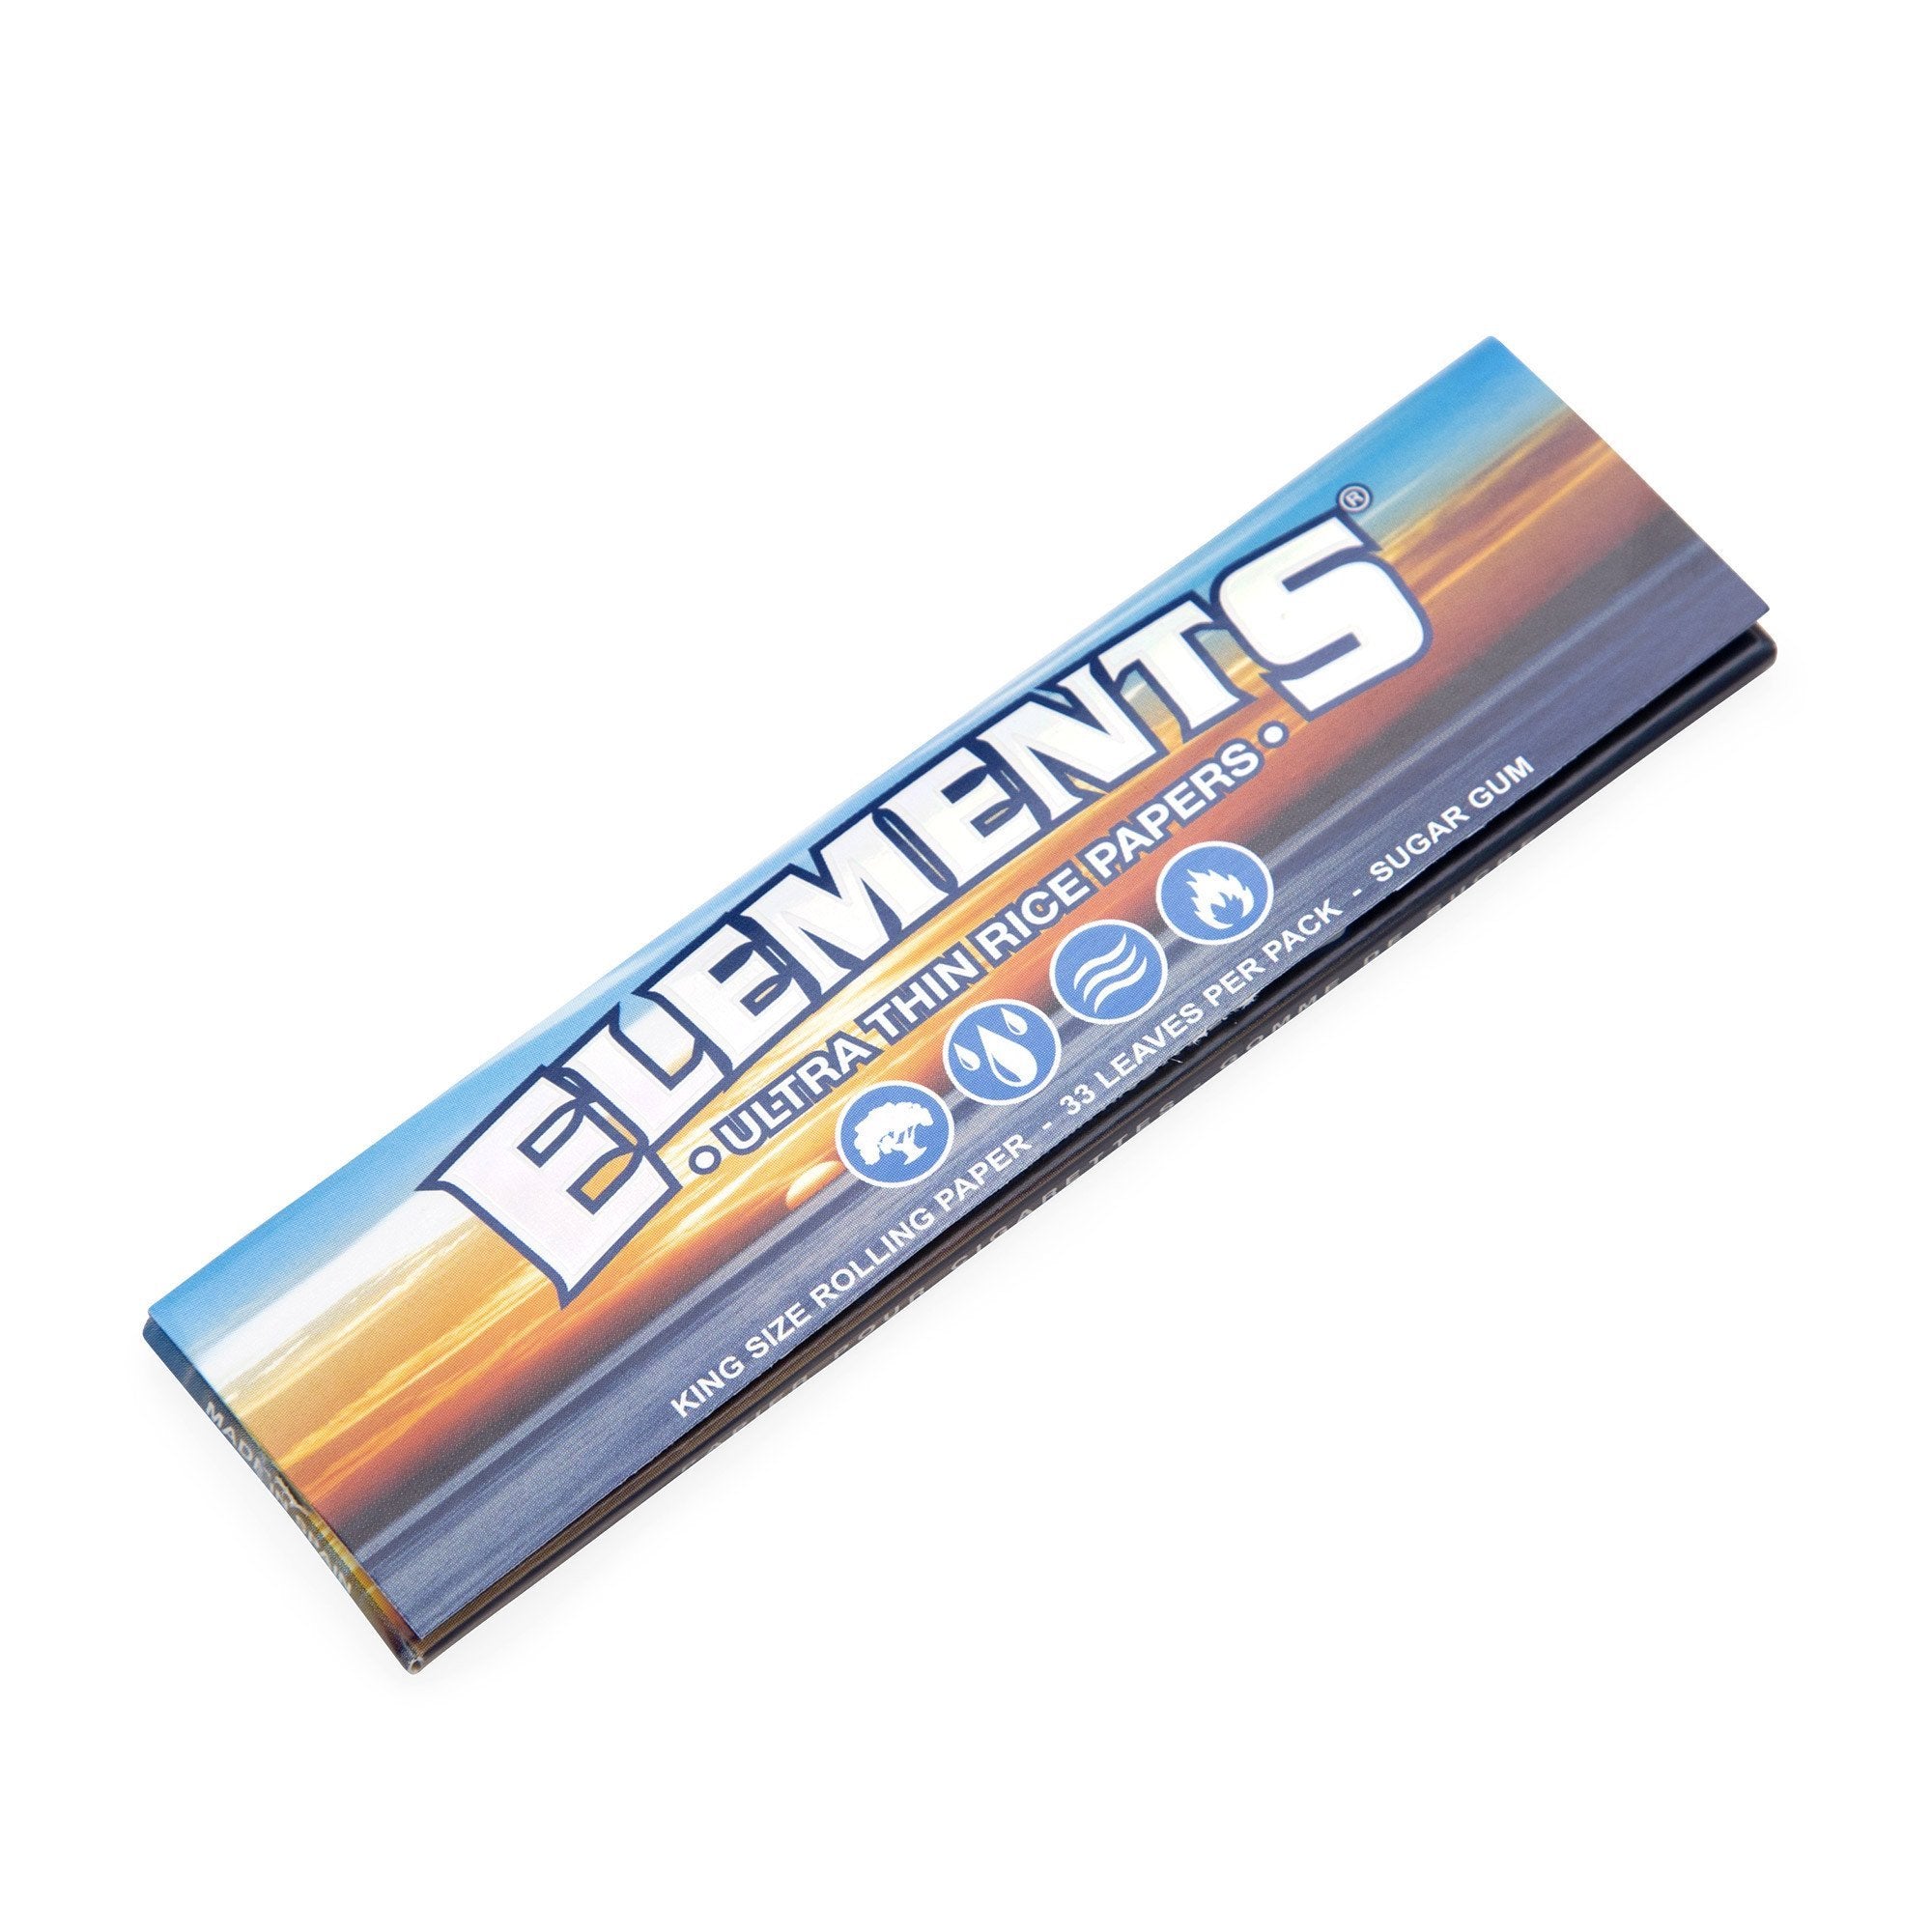  Elements King Size Slim Ultra Thin Rice Rolling Paper